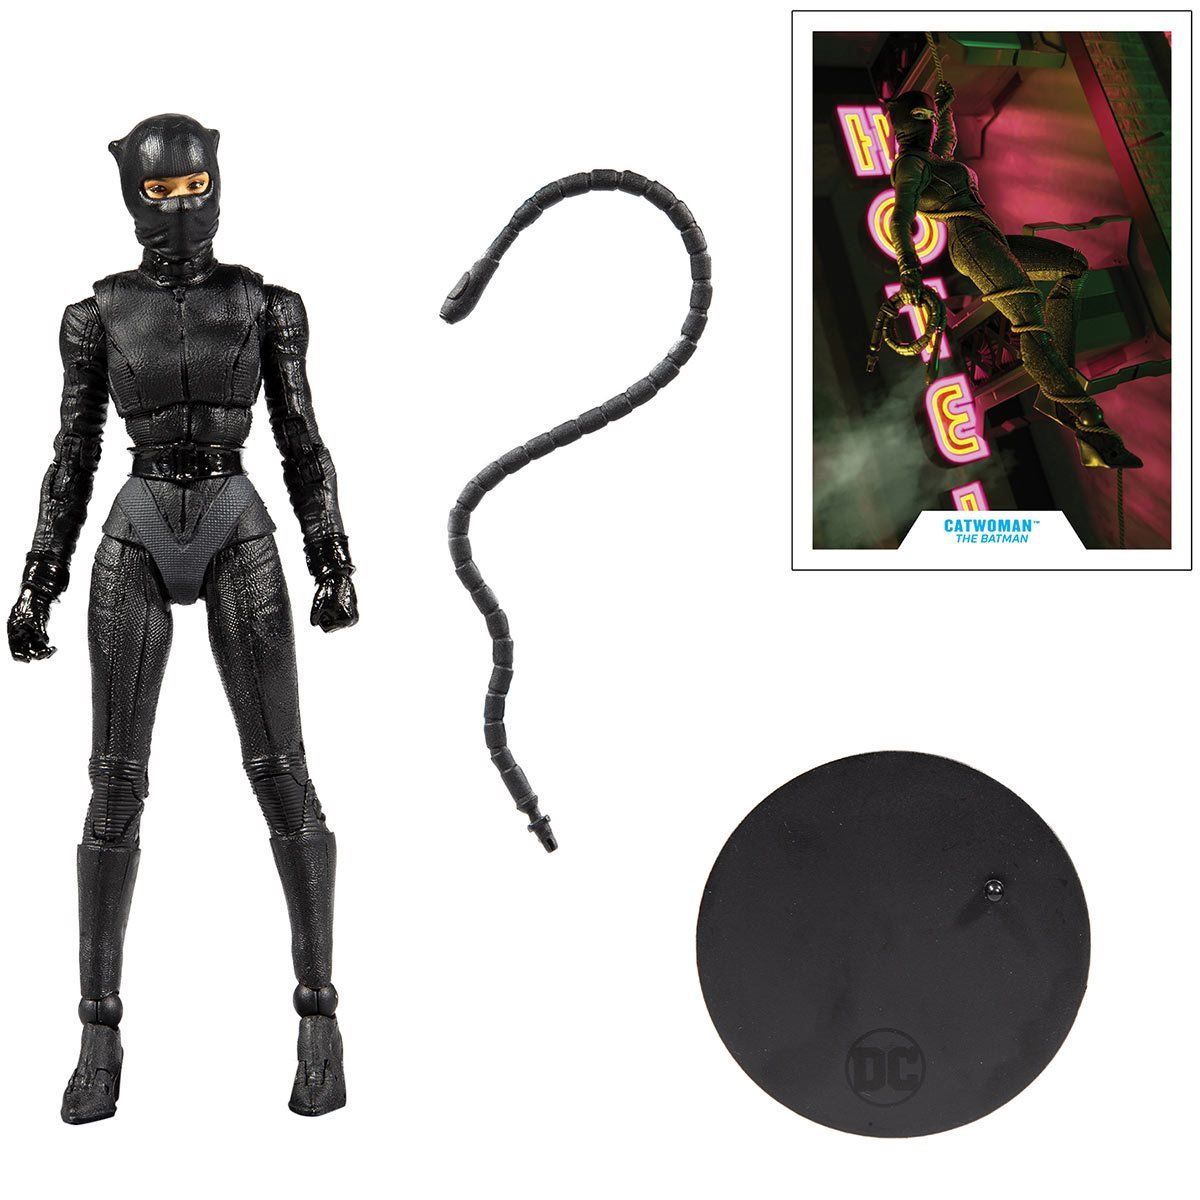 The Batman Figures Give Detailed Look at Catwoman Riddler’s Costumes